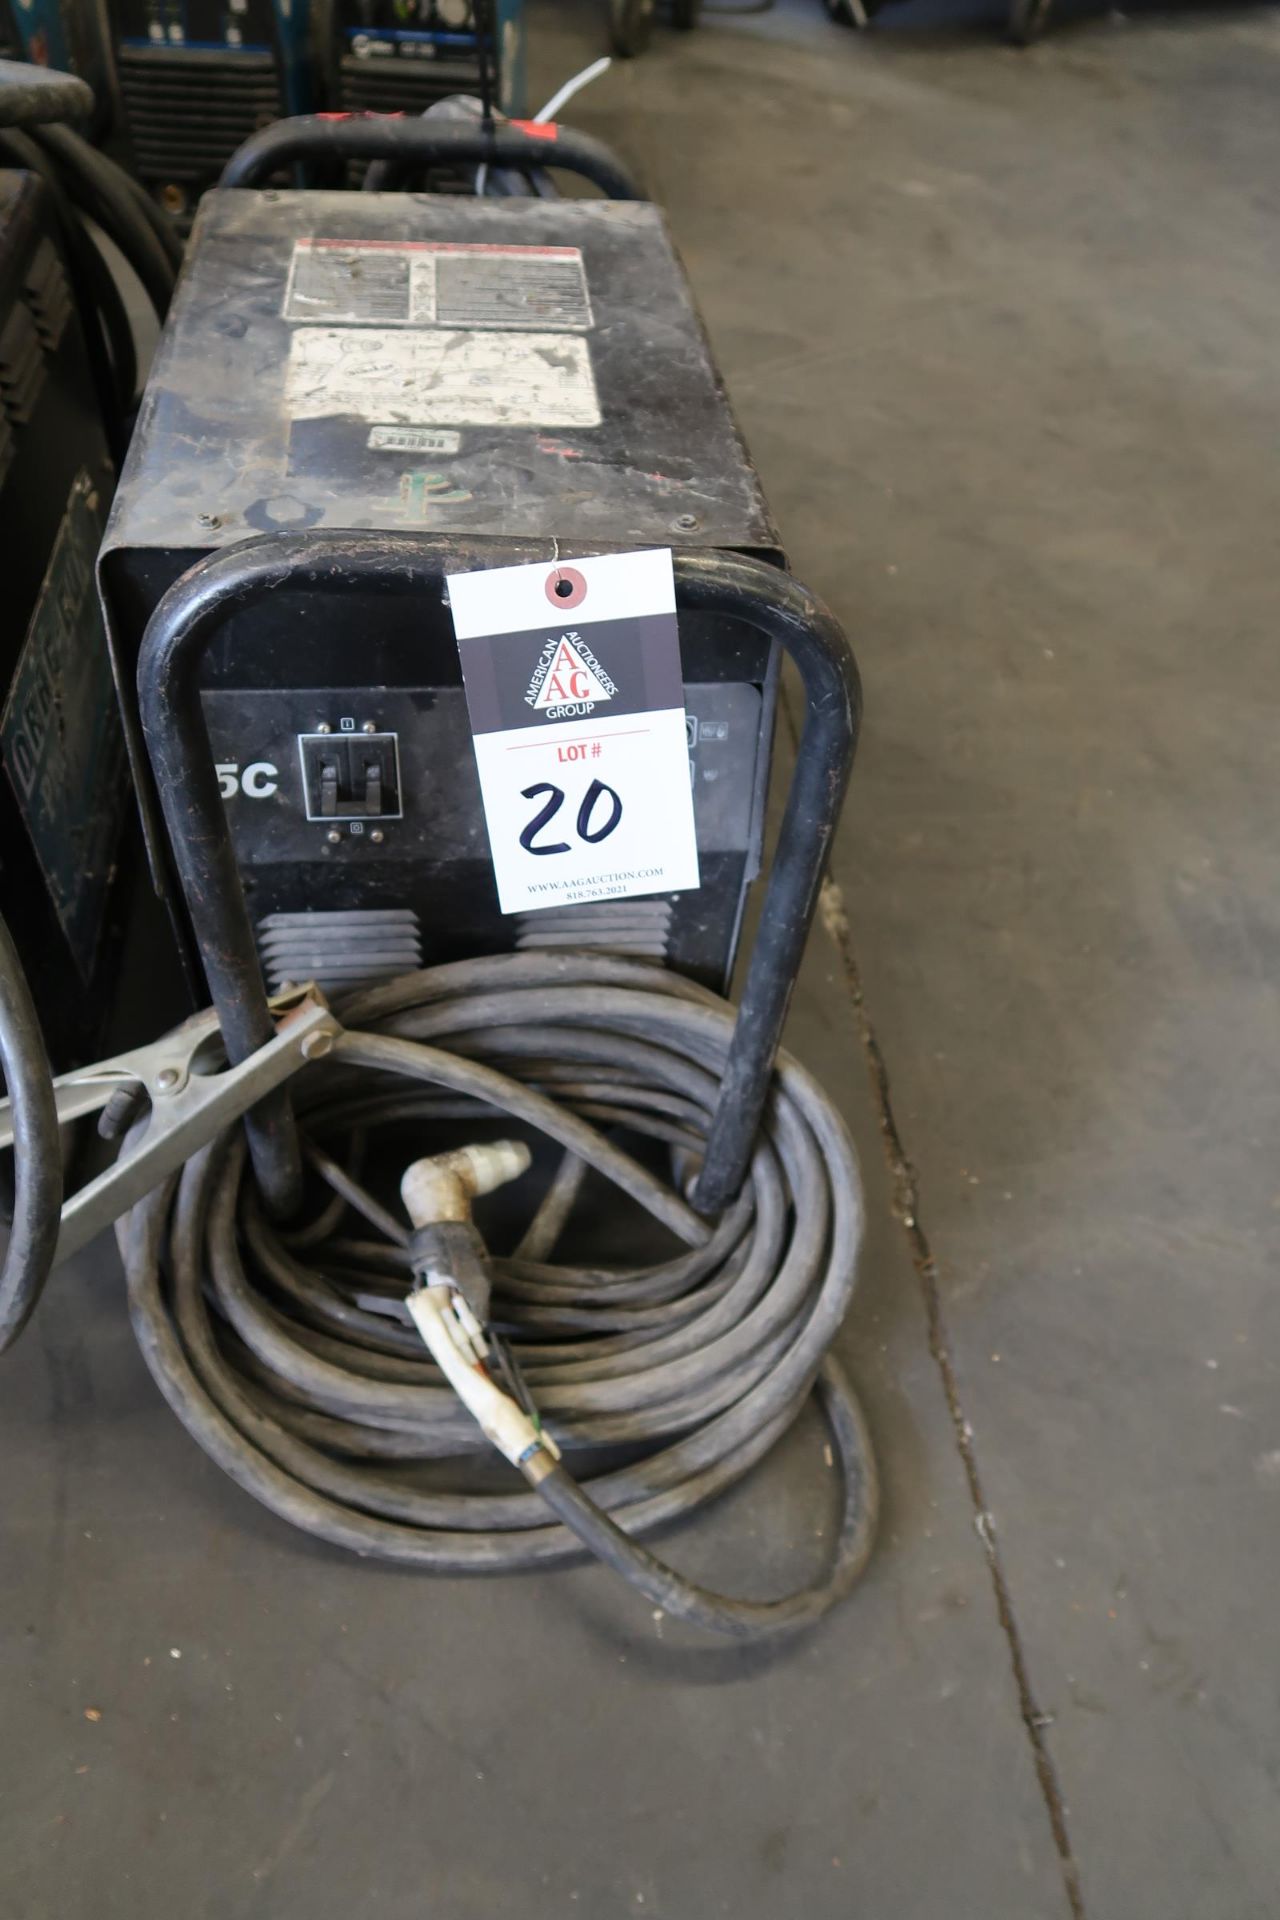 Thermal Dynamics 35C Plasma Cutting Power Source (NEEDS NEW GUN) (SOLD AS-IS - NO WARRANTY)